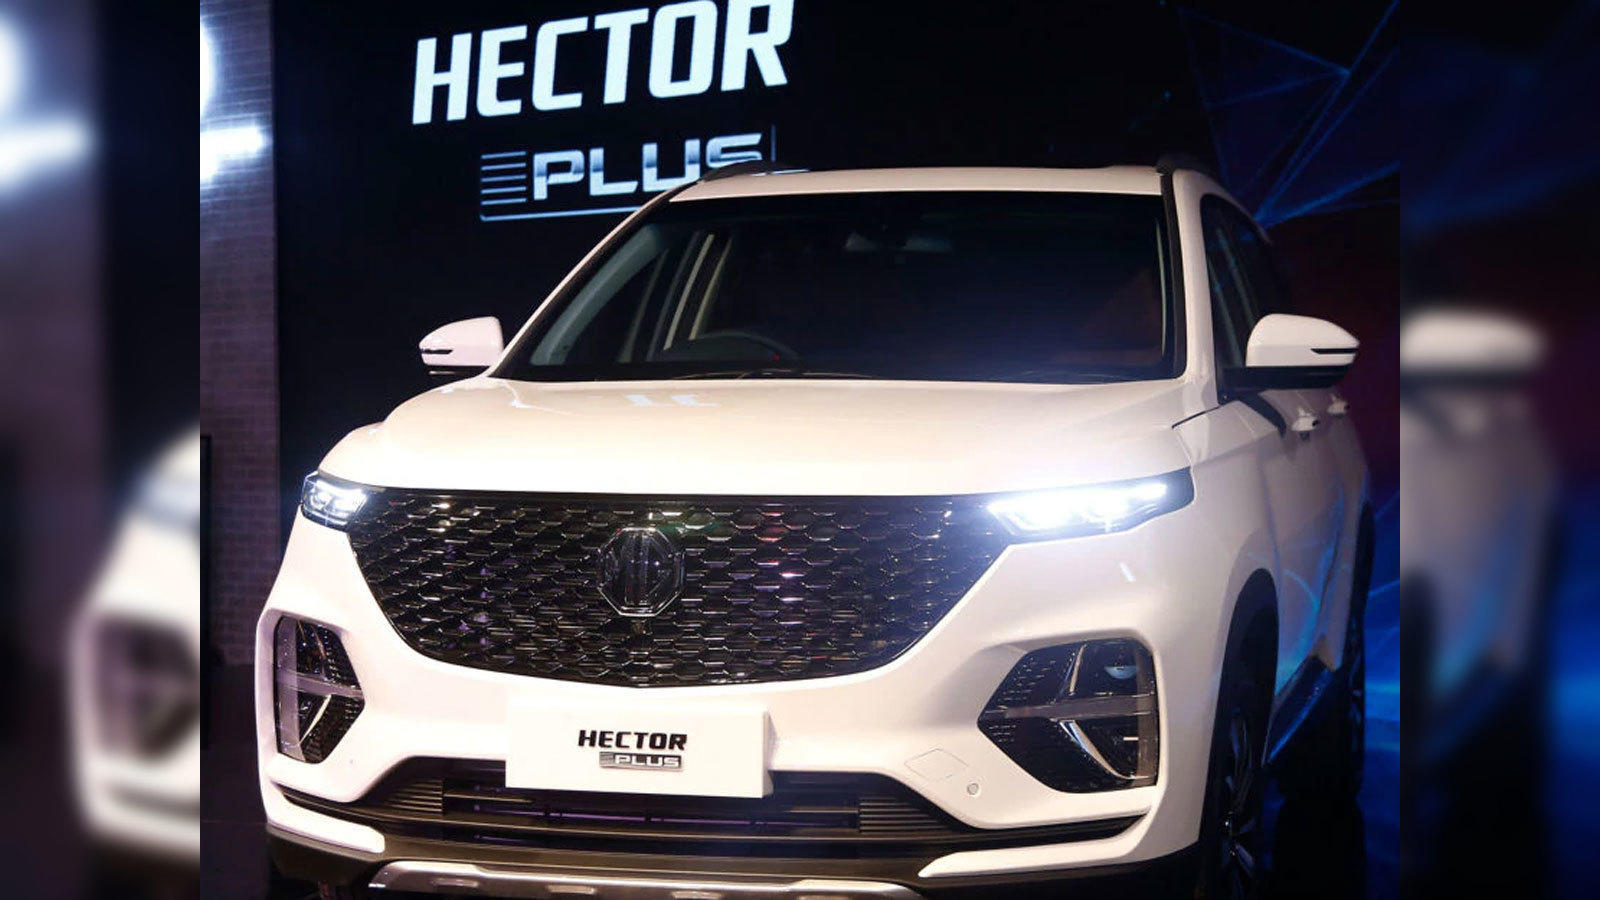 MG Motor India to enter MPV segment with Hector Plus - The Economic Times